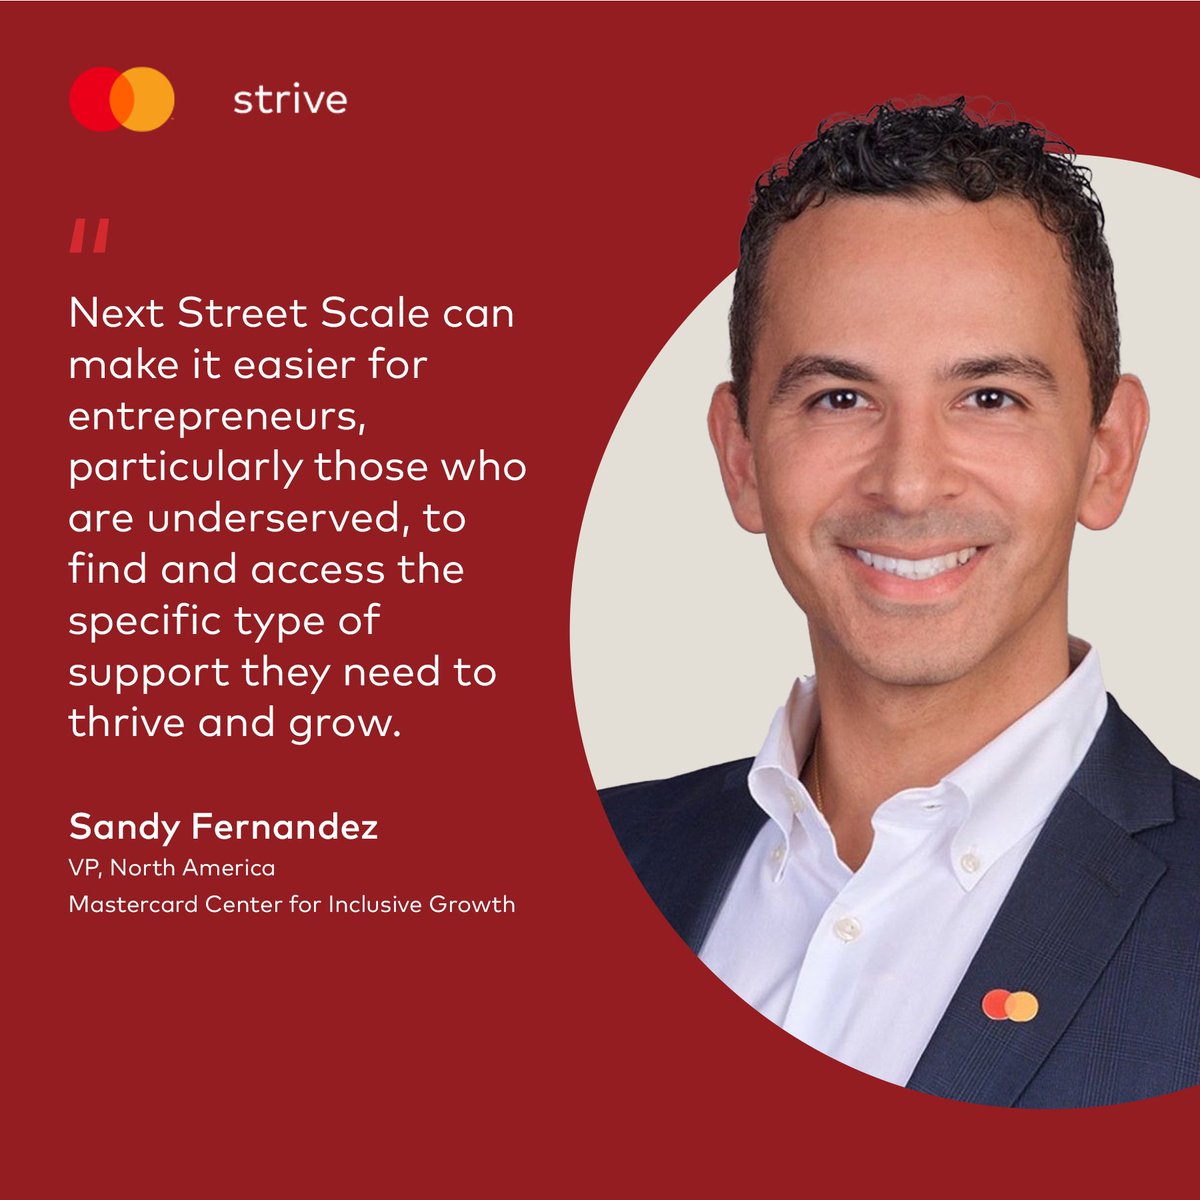 📢 Introducing NYC Funds Finder! An innovative platform that solves the unique financial challenges of small businesses. Developed by @Mastercard #StriveUSA partner @nextstreet & @NYC_SBS, it's a game-changer for #SmallBusiness owners. Learn more: news.mstr.cd/3ZyVyf0